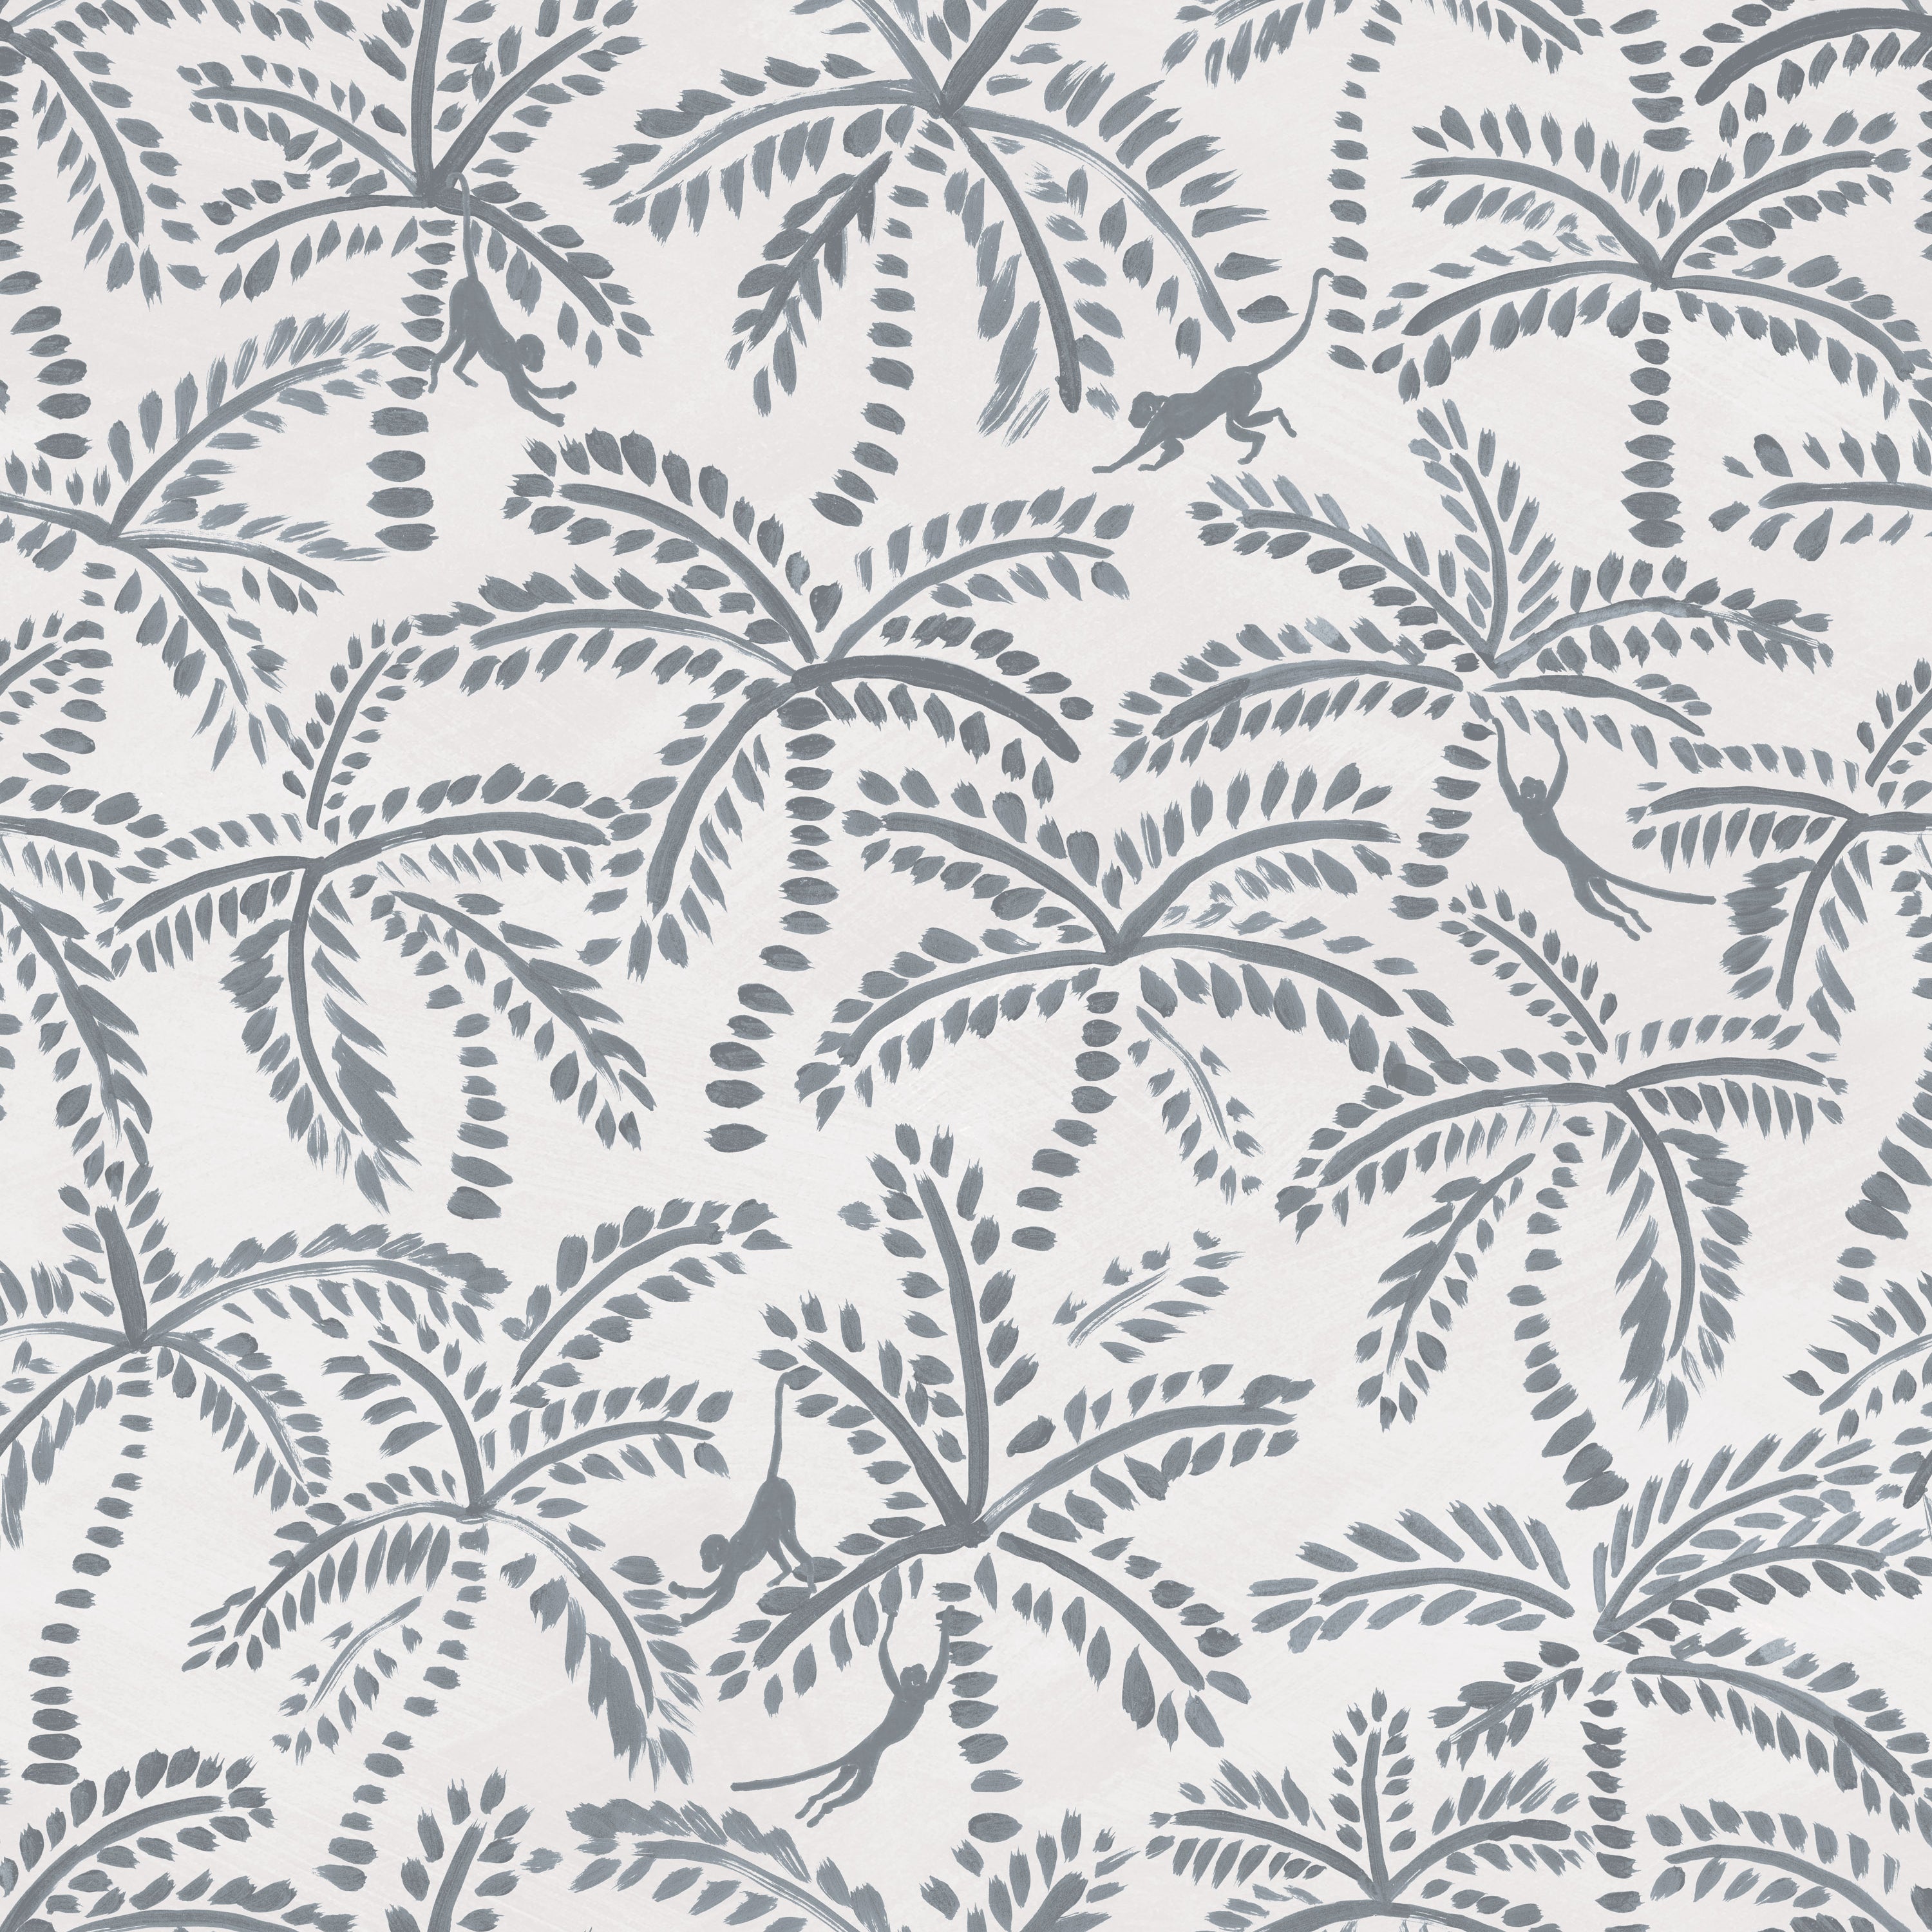 Detail of fabric in a playful palm tree and monkey print in navy on a cream field.